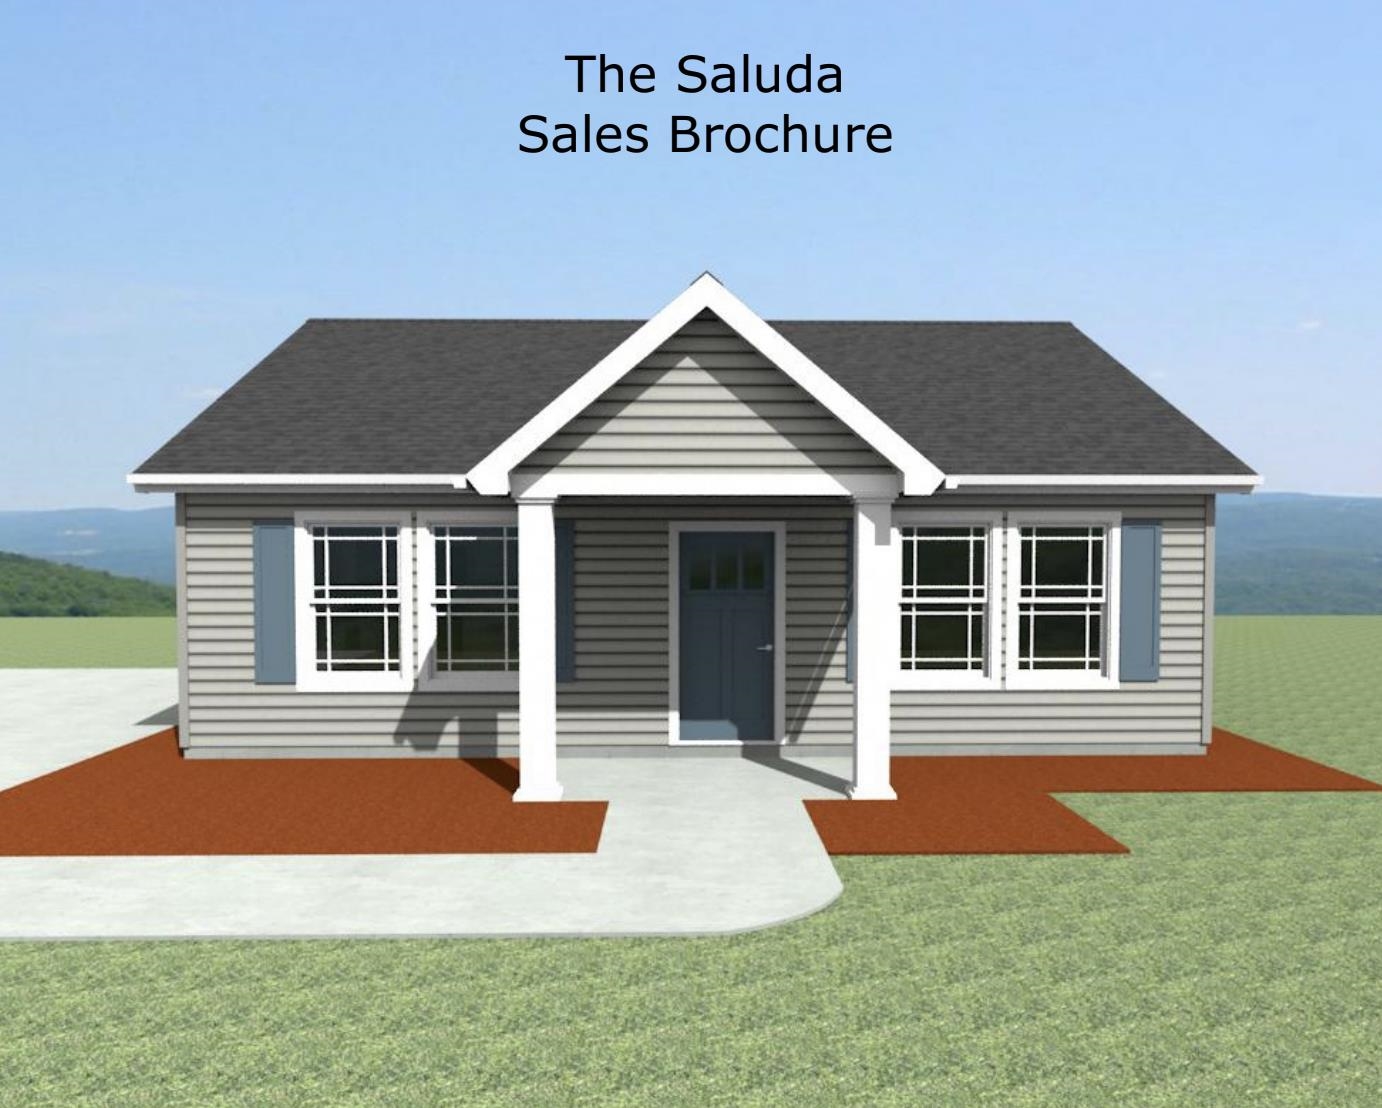 The Saluda plan features 2 bedrooms and 2 bathrooms. The spacious living area is open into the kitchen/dining area. The master bedroom features a tray ceiling and full bathroom. 30-year architectural shingles, site-built construction, and a "2-10" warranty are included to give you peace of mind. Lot 18. Preferred Lender/Attorney Closing Costs Incentive Offered!